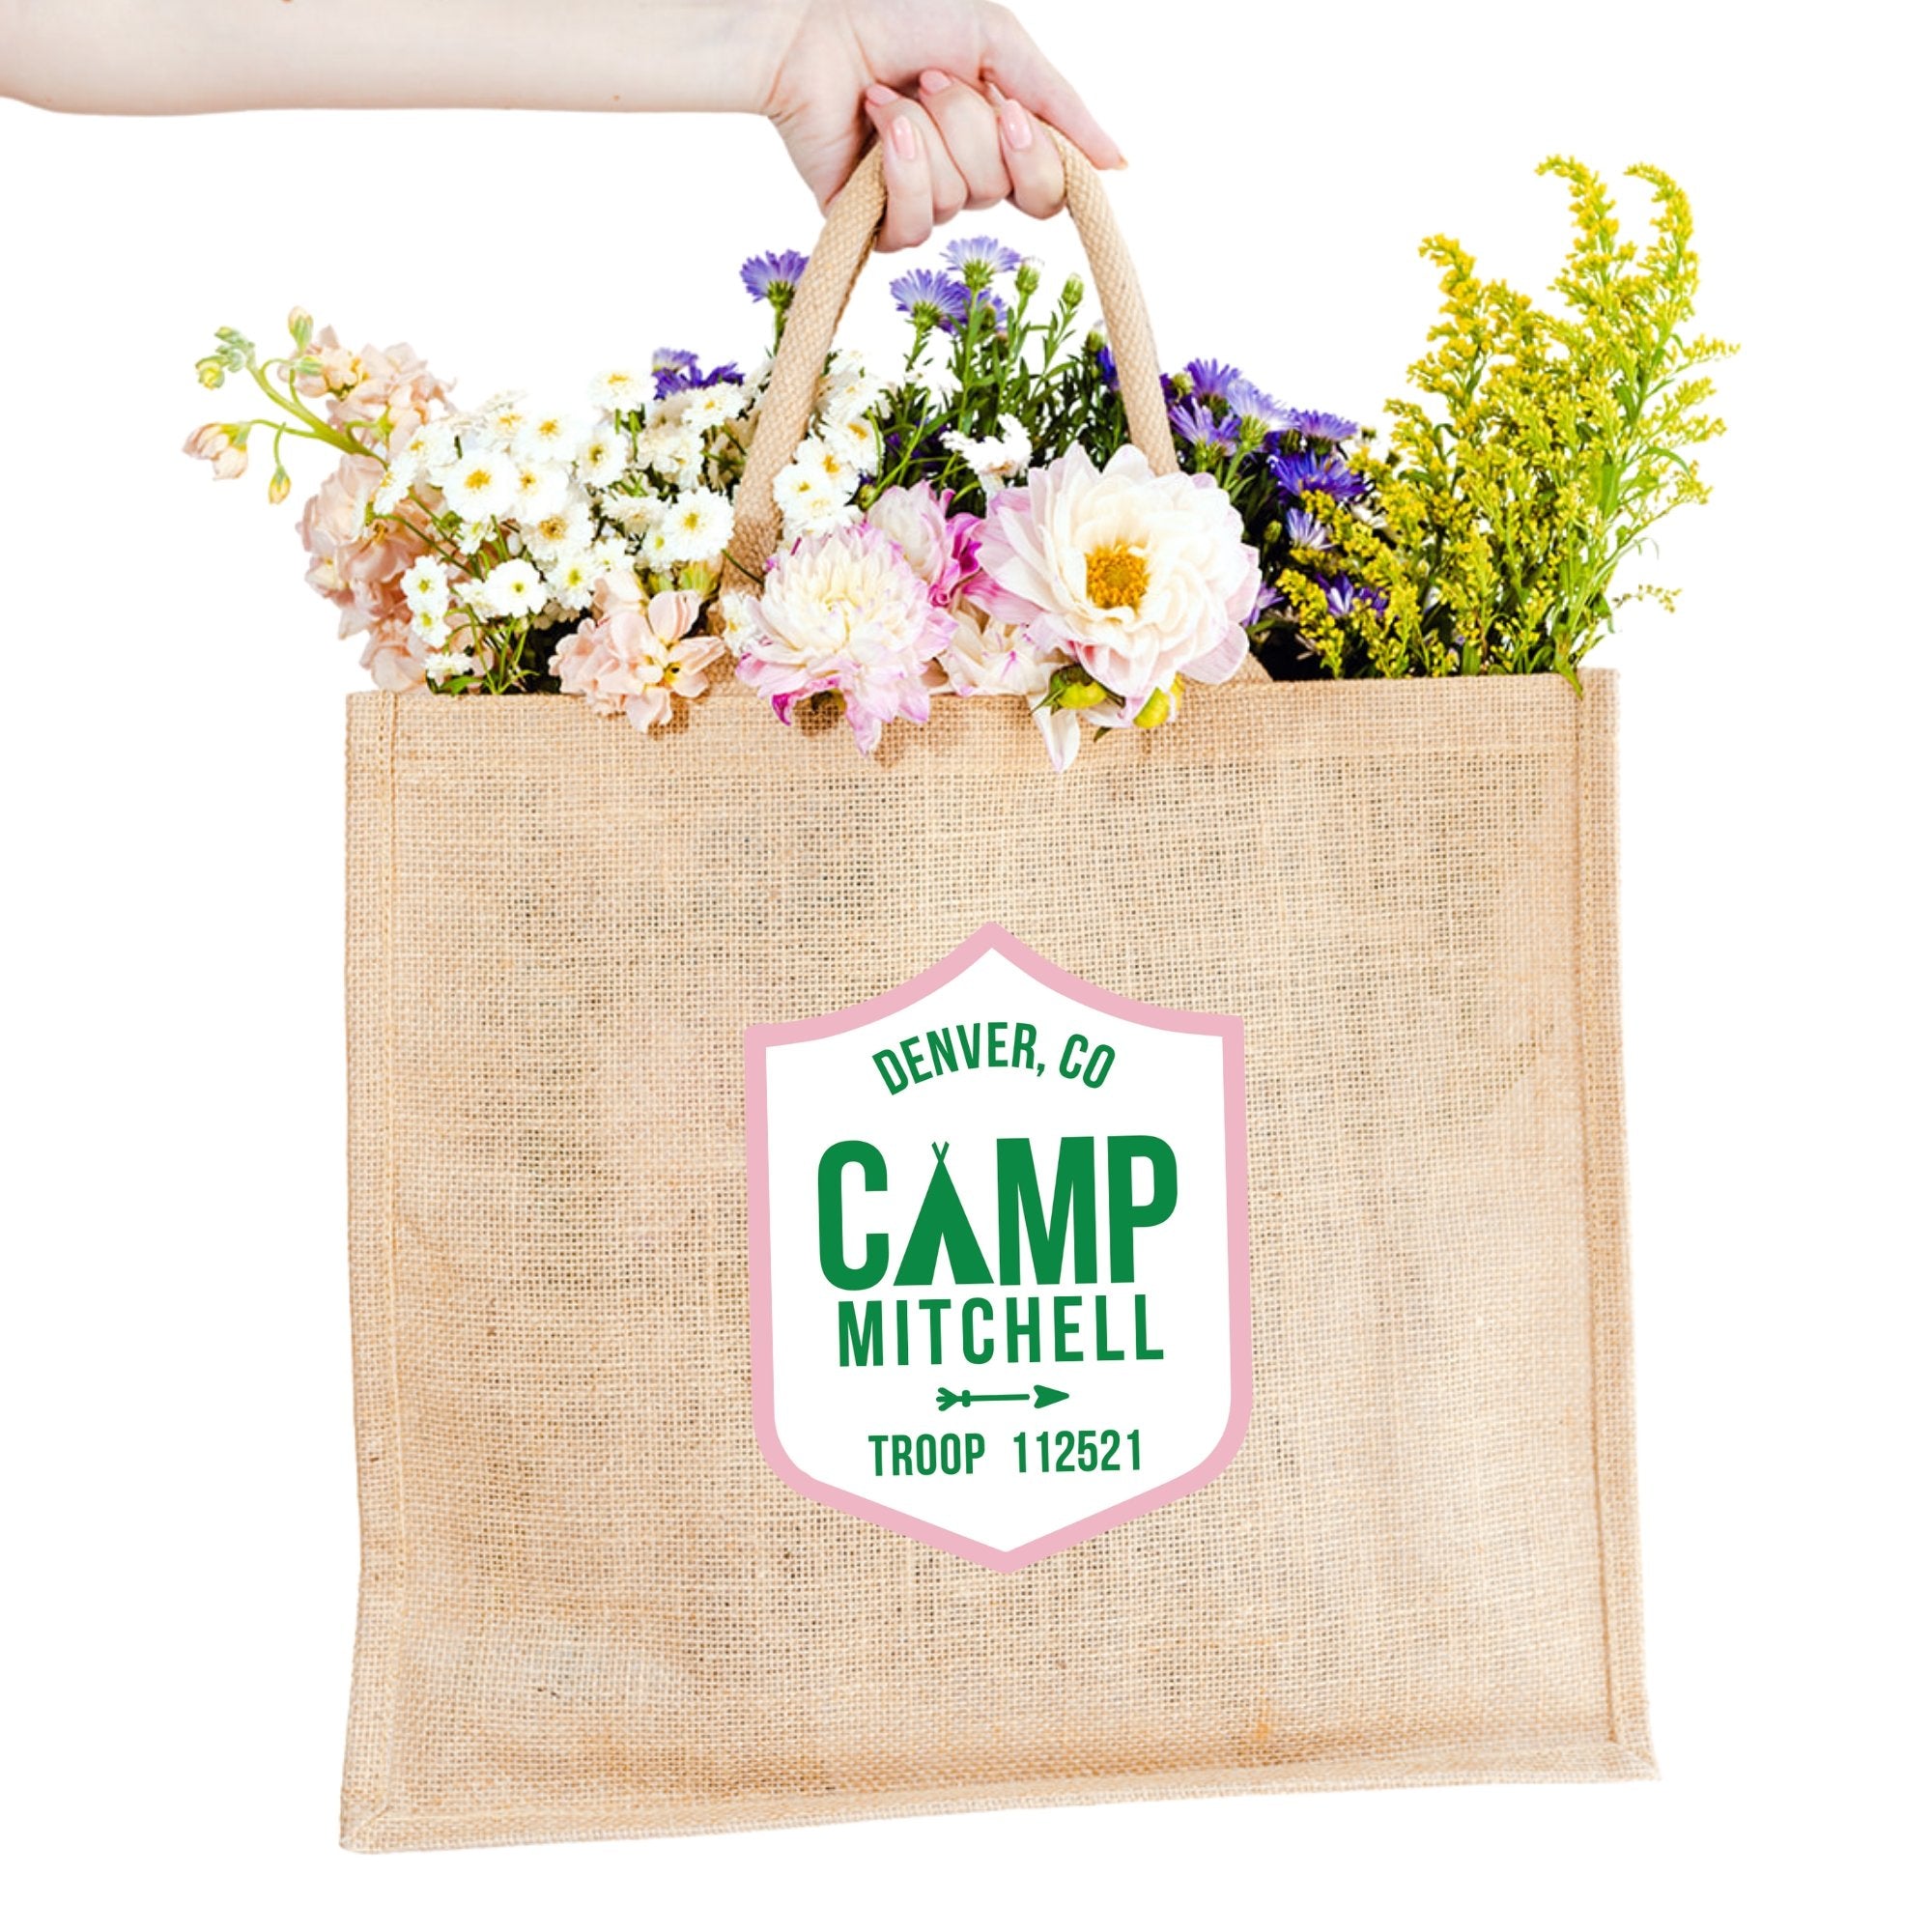 A jute carryall is customized with a green and pink camp logo